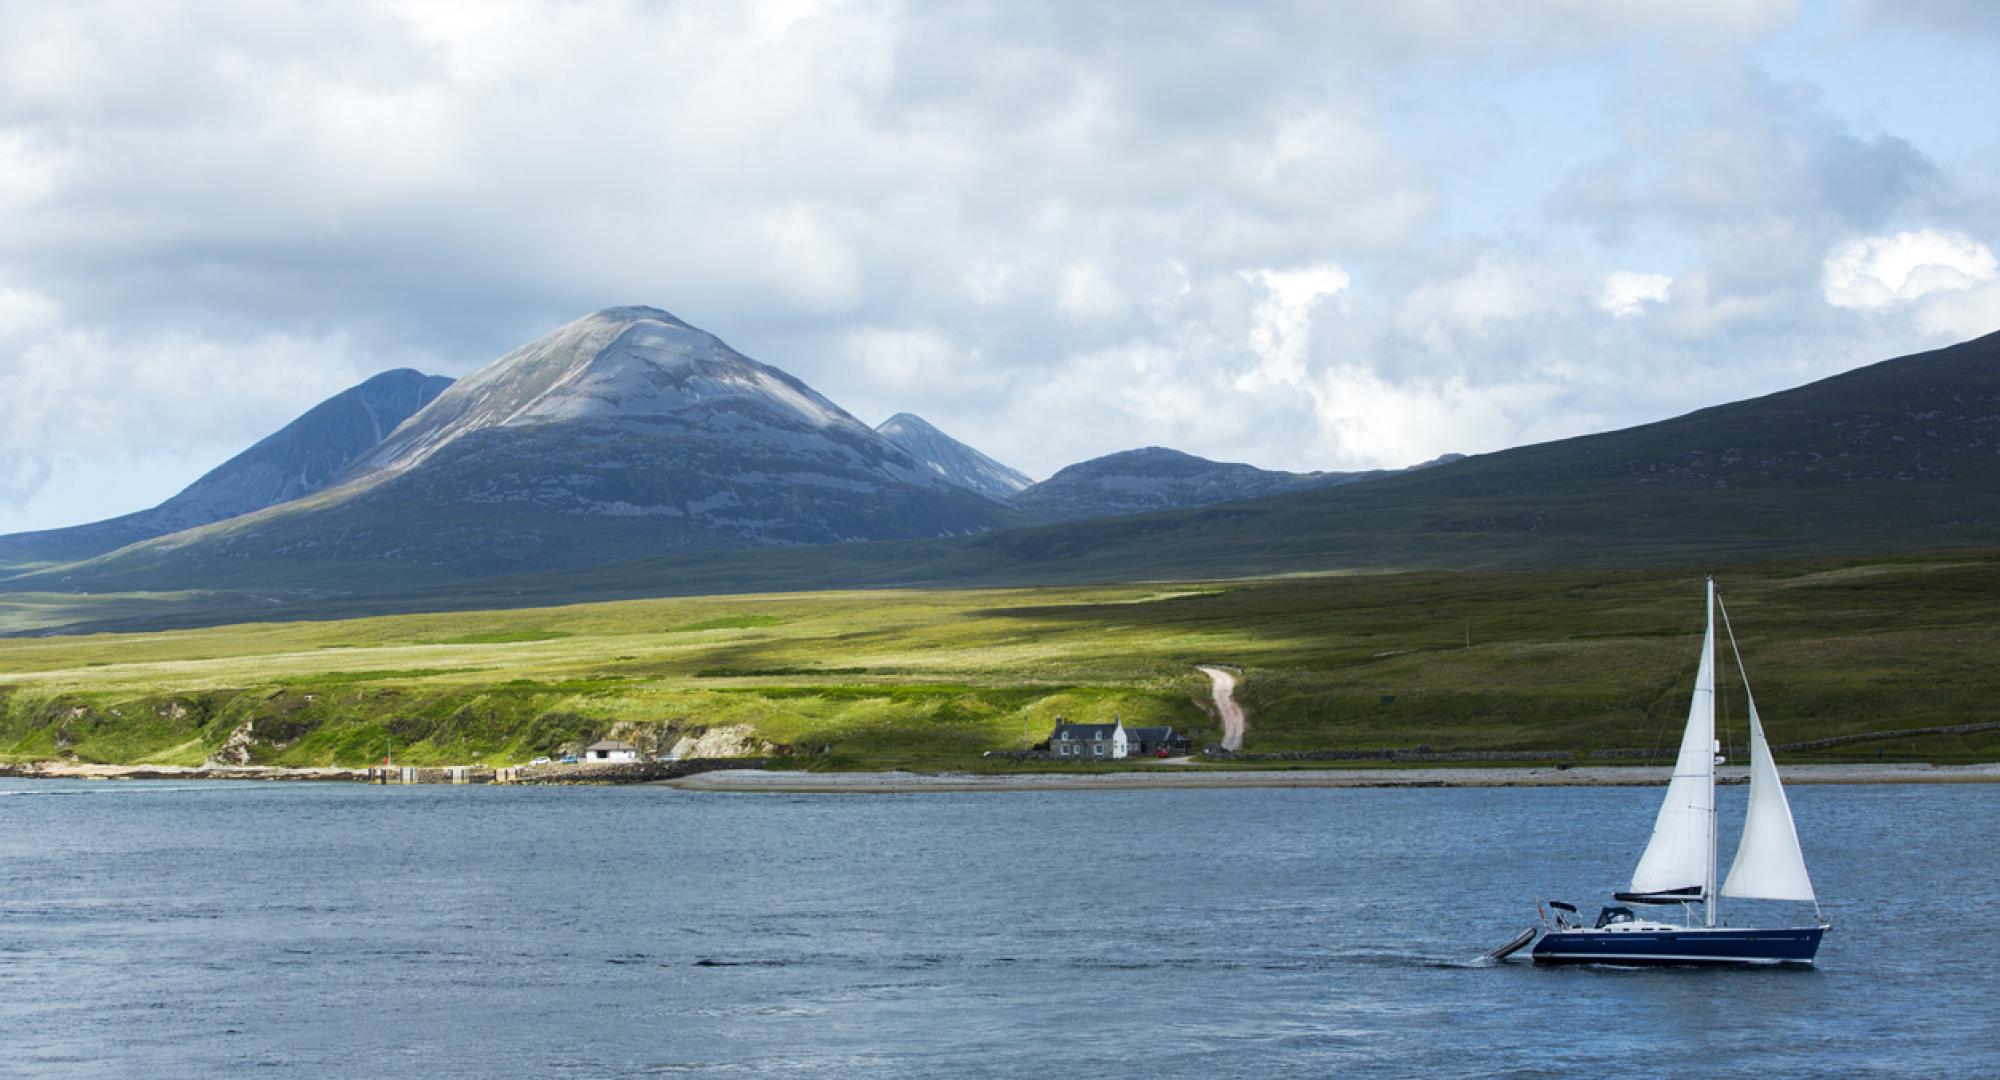 Panoramic view of Scottish island with a boat in the foreground